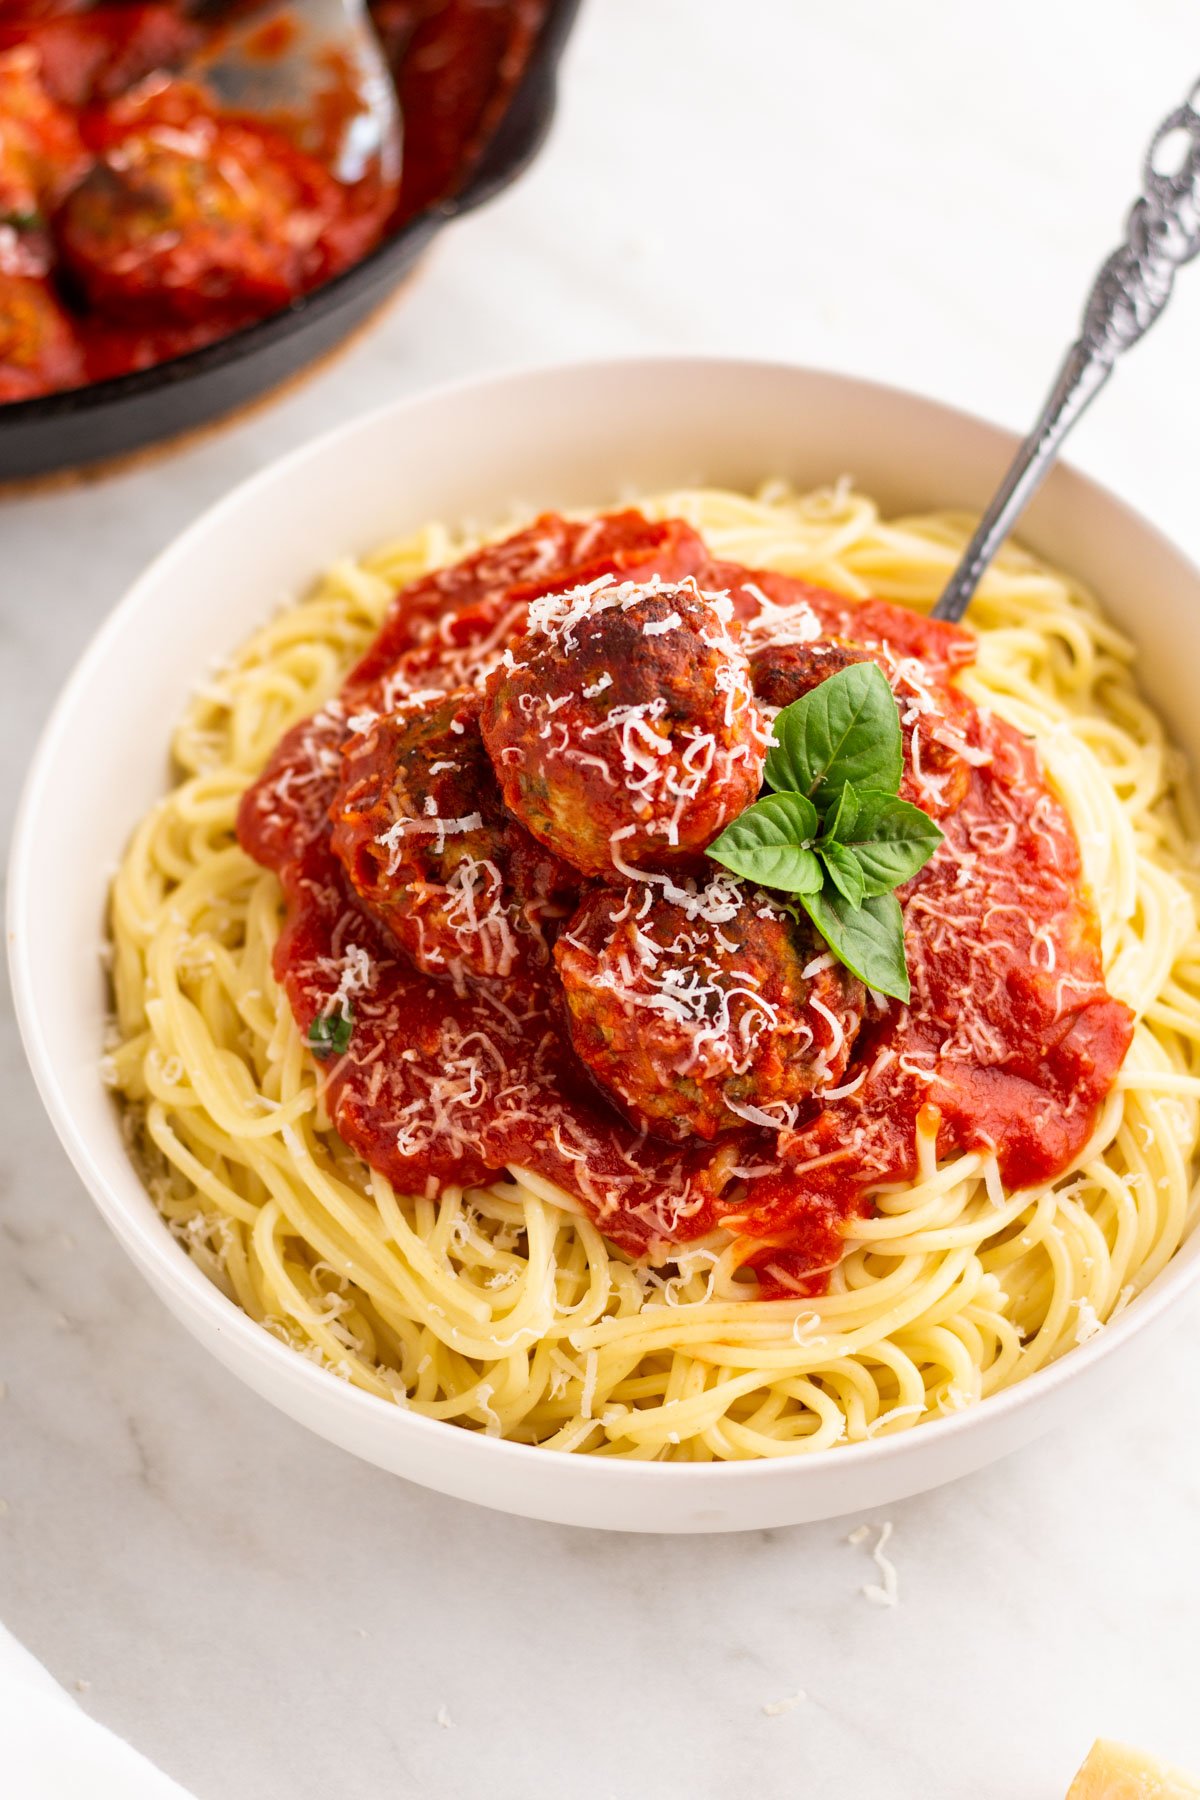 Ricotta meatballs is an upgraded recipe for a must have recipe in your arsenal: meatballs. These cheesy meatballs can be easily made gluten free and can be all beef or all pork to fit your preference. This recipe makes a generous portion and is absolutely perfect for meal prep, family gatherings, or a simple dinner at home. Ricotta meatballs are versatile and can go with or on anything you like to add meatballs to. It's delicious, easy, and a classic all in one. #glutenfreerecipes #easydinnerrecipes #meatballs #ricotta #skilletrecipes